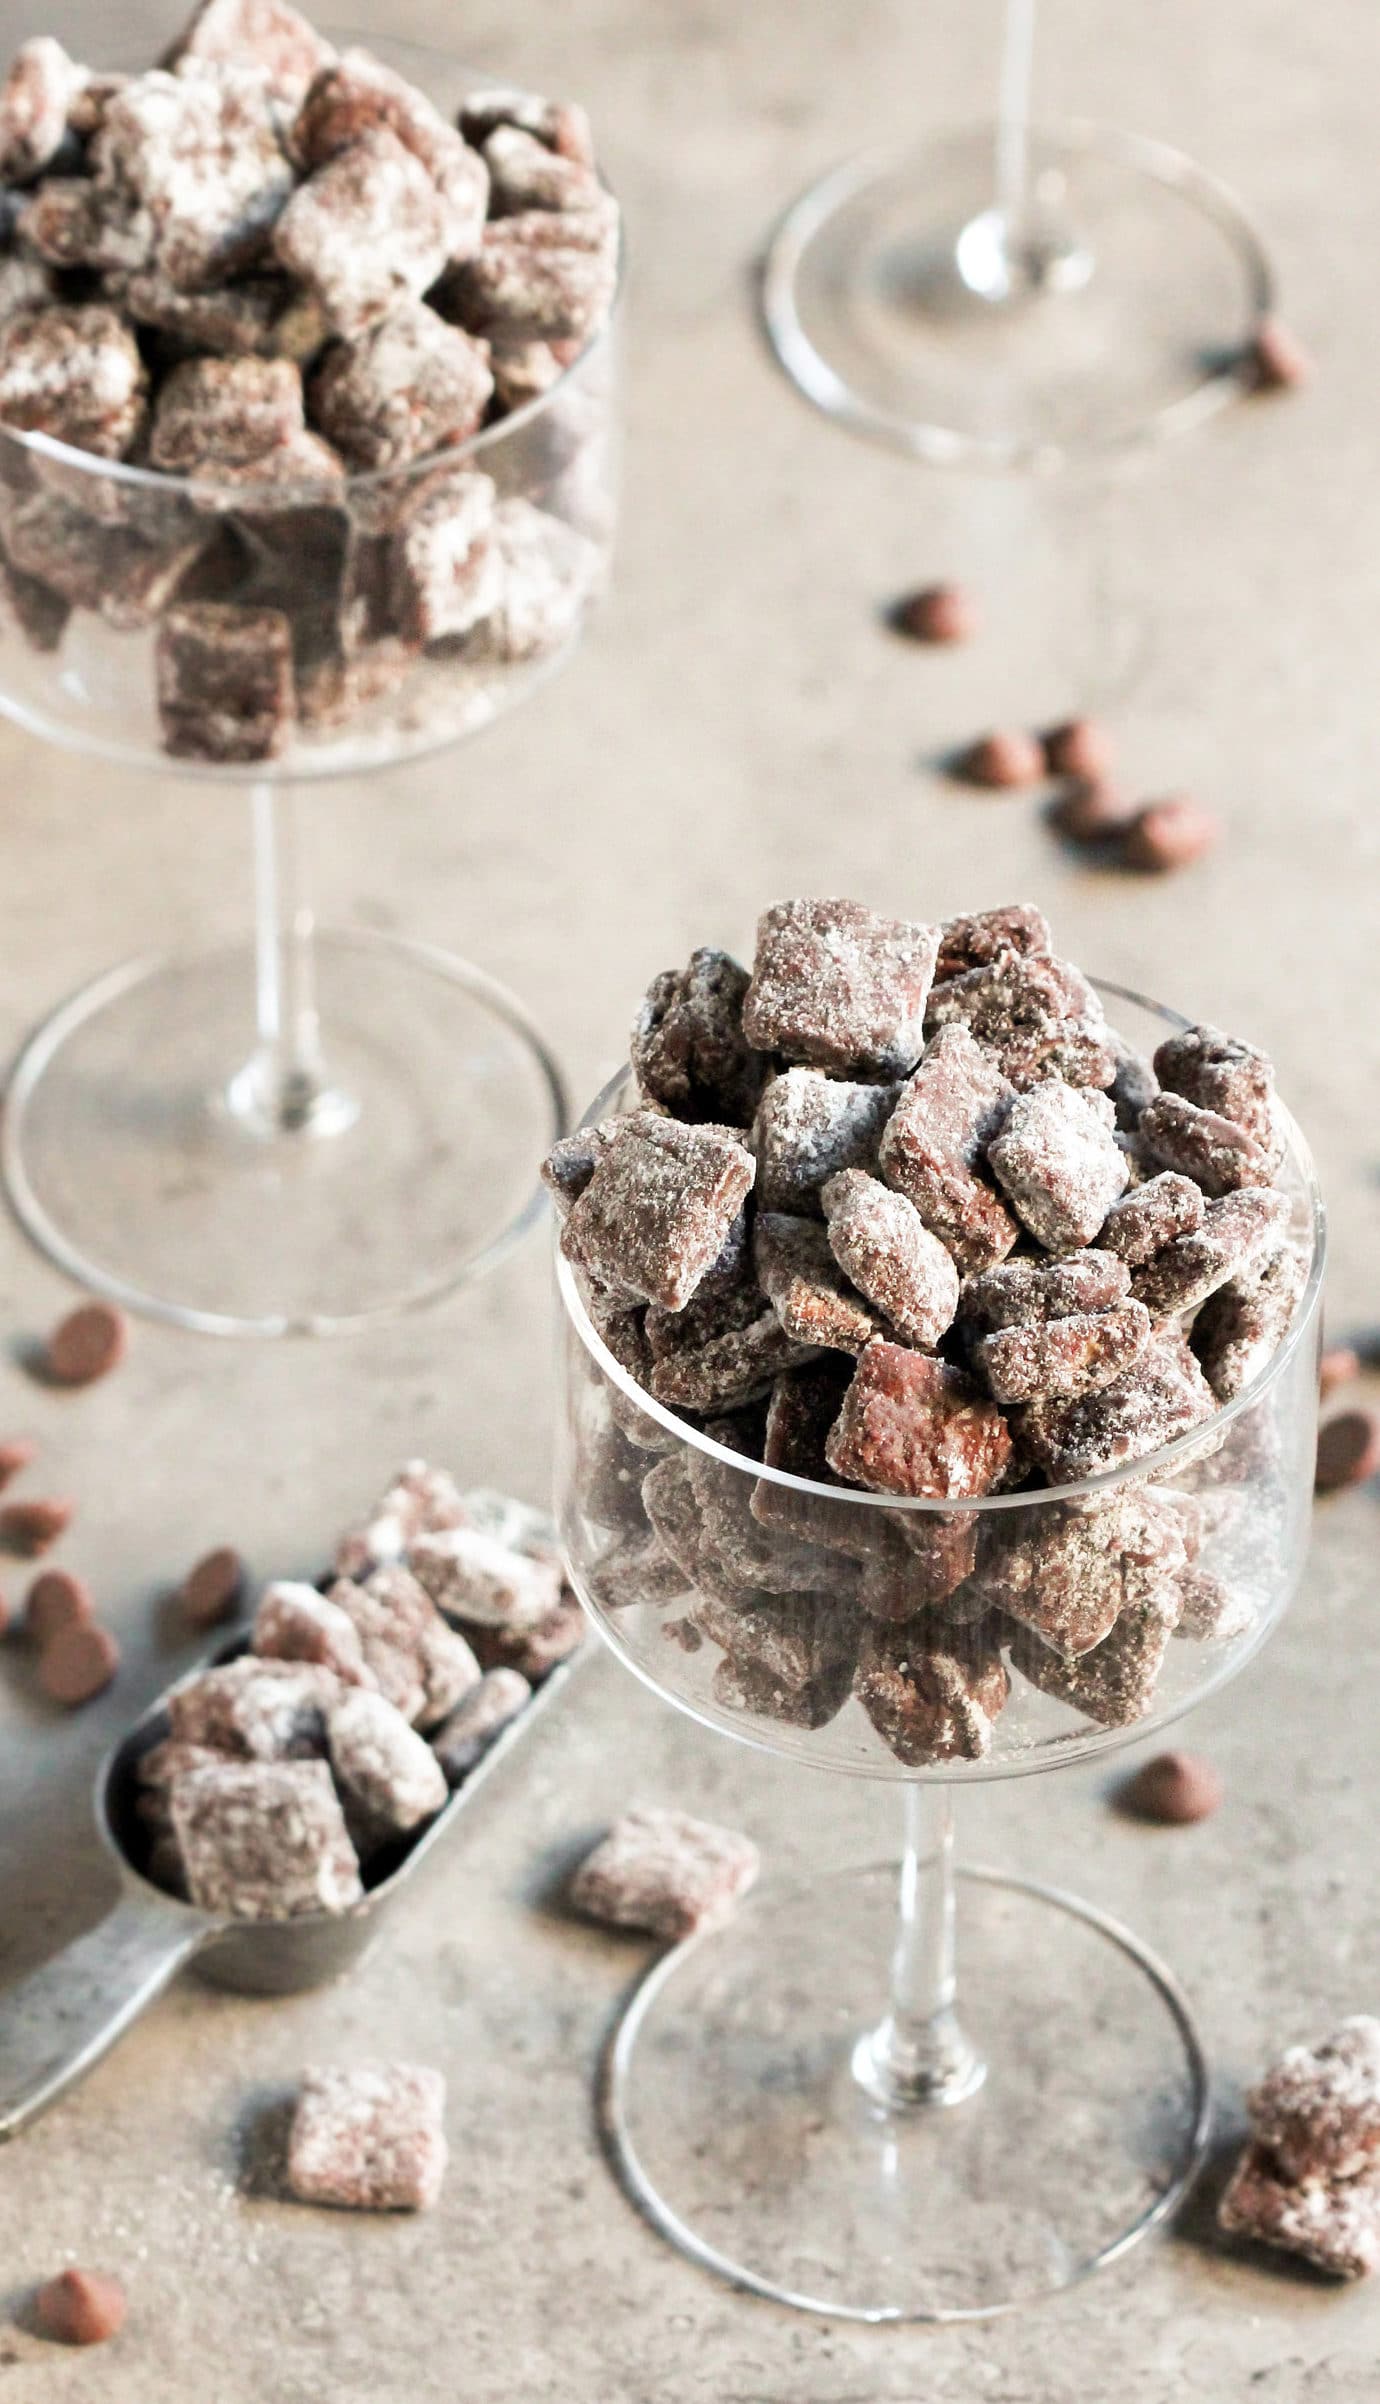 These Healthy Muddy Buddies (or Healthy Puppy Chow, whatever you like to call it!) are the PERFECT snack! Crunchy, sweet, chocolatey, peanut buttery, and delicious. You’d never know it’s got half the calories and fat as the original, a fraction of the sugar, and is dairy free and vegan too! Healthy Dessert Recipes at the Desserts With Benefits Blog (www.DessertsWithBenefits.com)